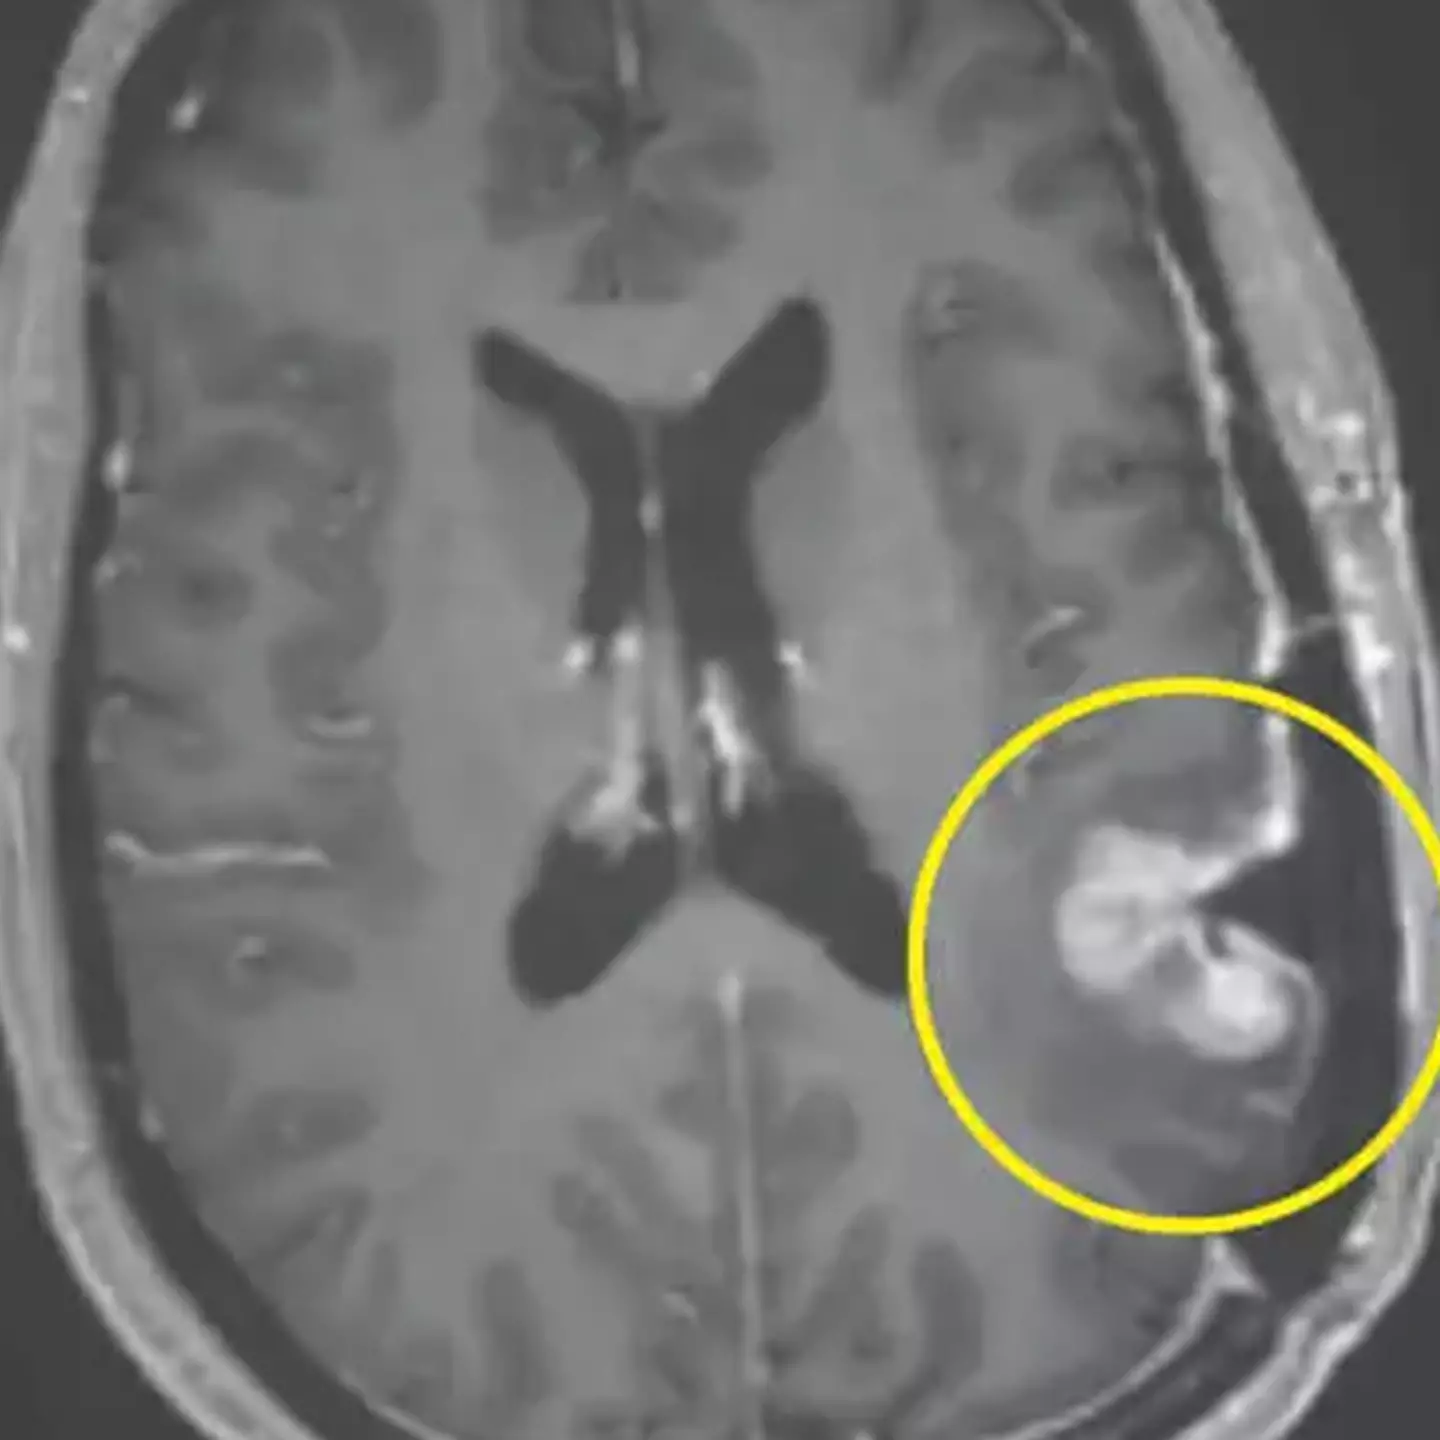 Incredible cancer breakthrough sees woman's brain tumor almost disappear in just five days